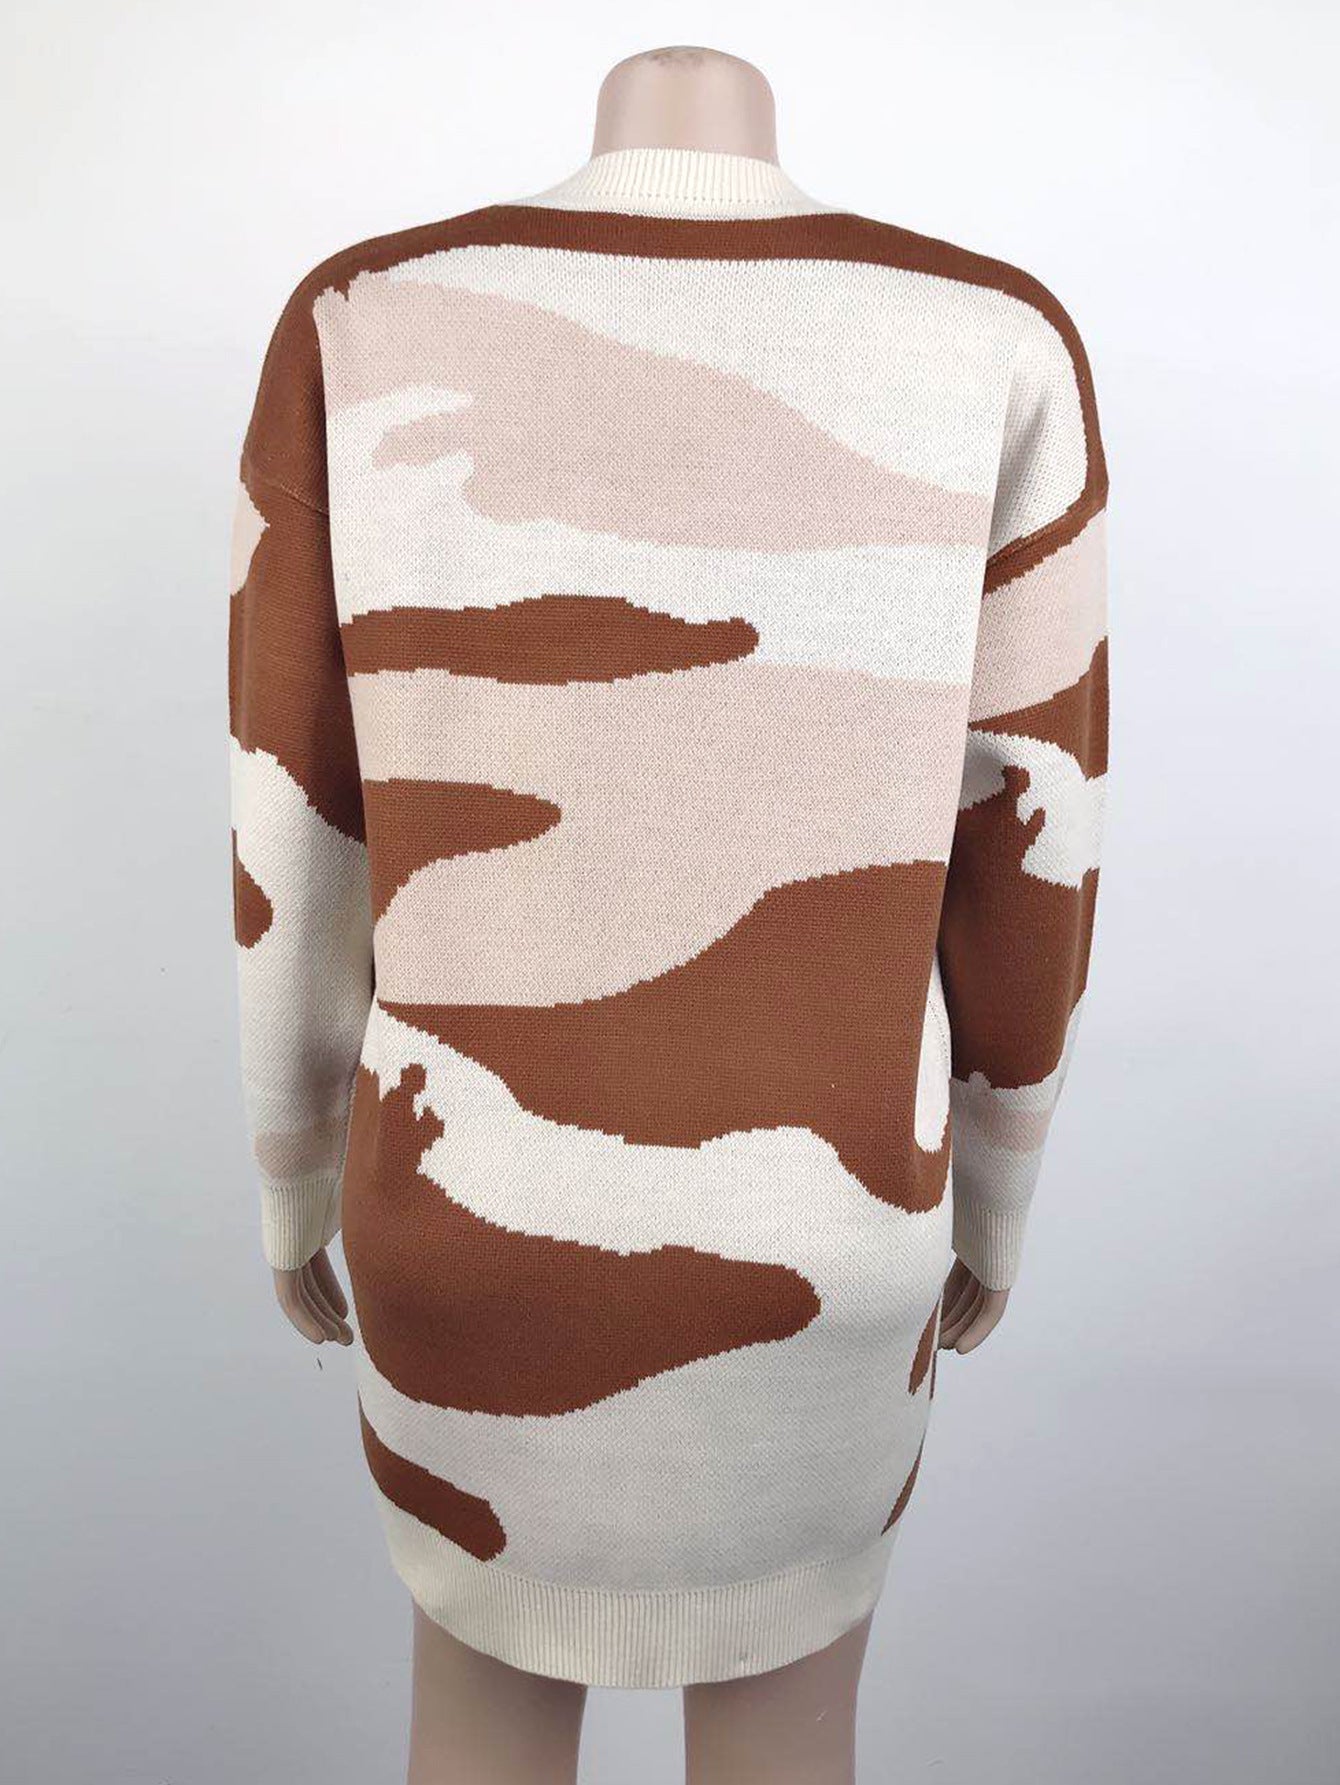 Women Cardigans Kniting Bicolor Camo Long Sleeves